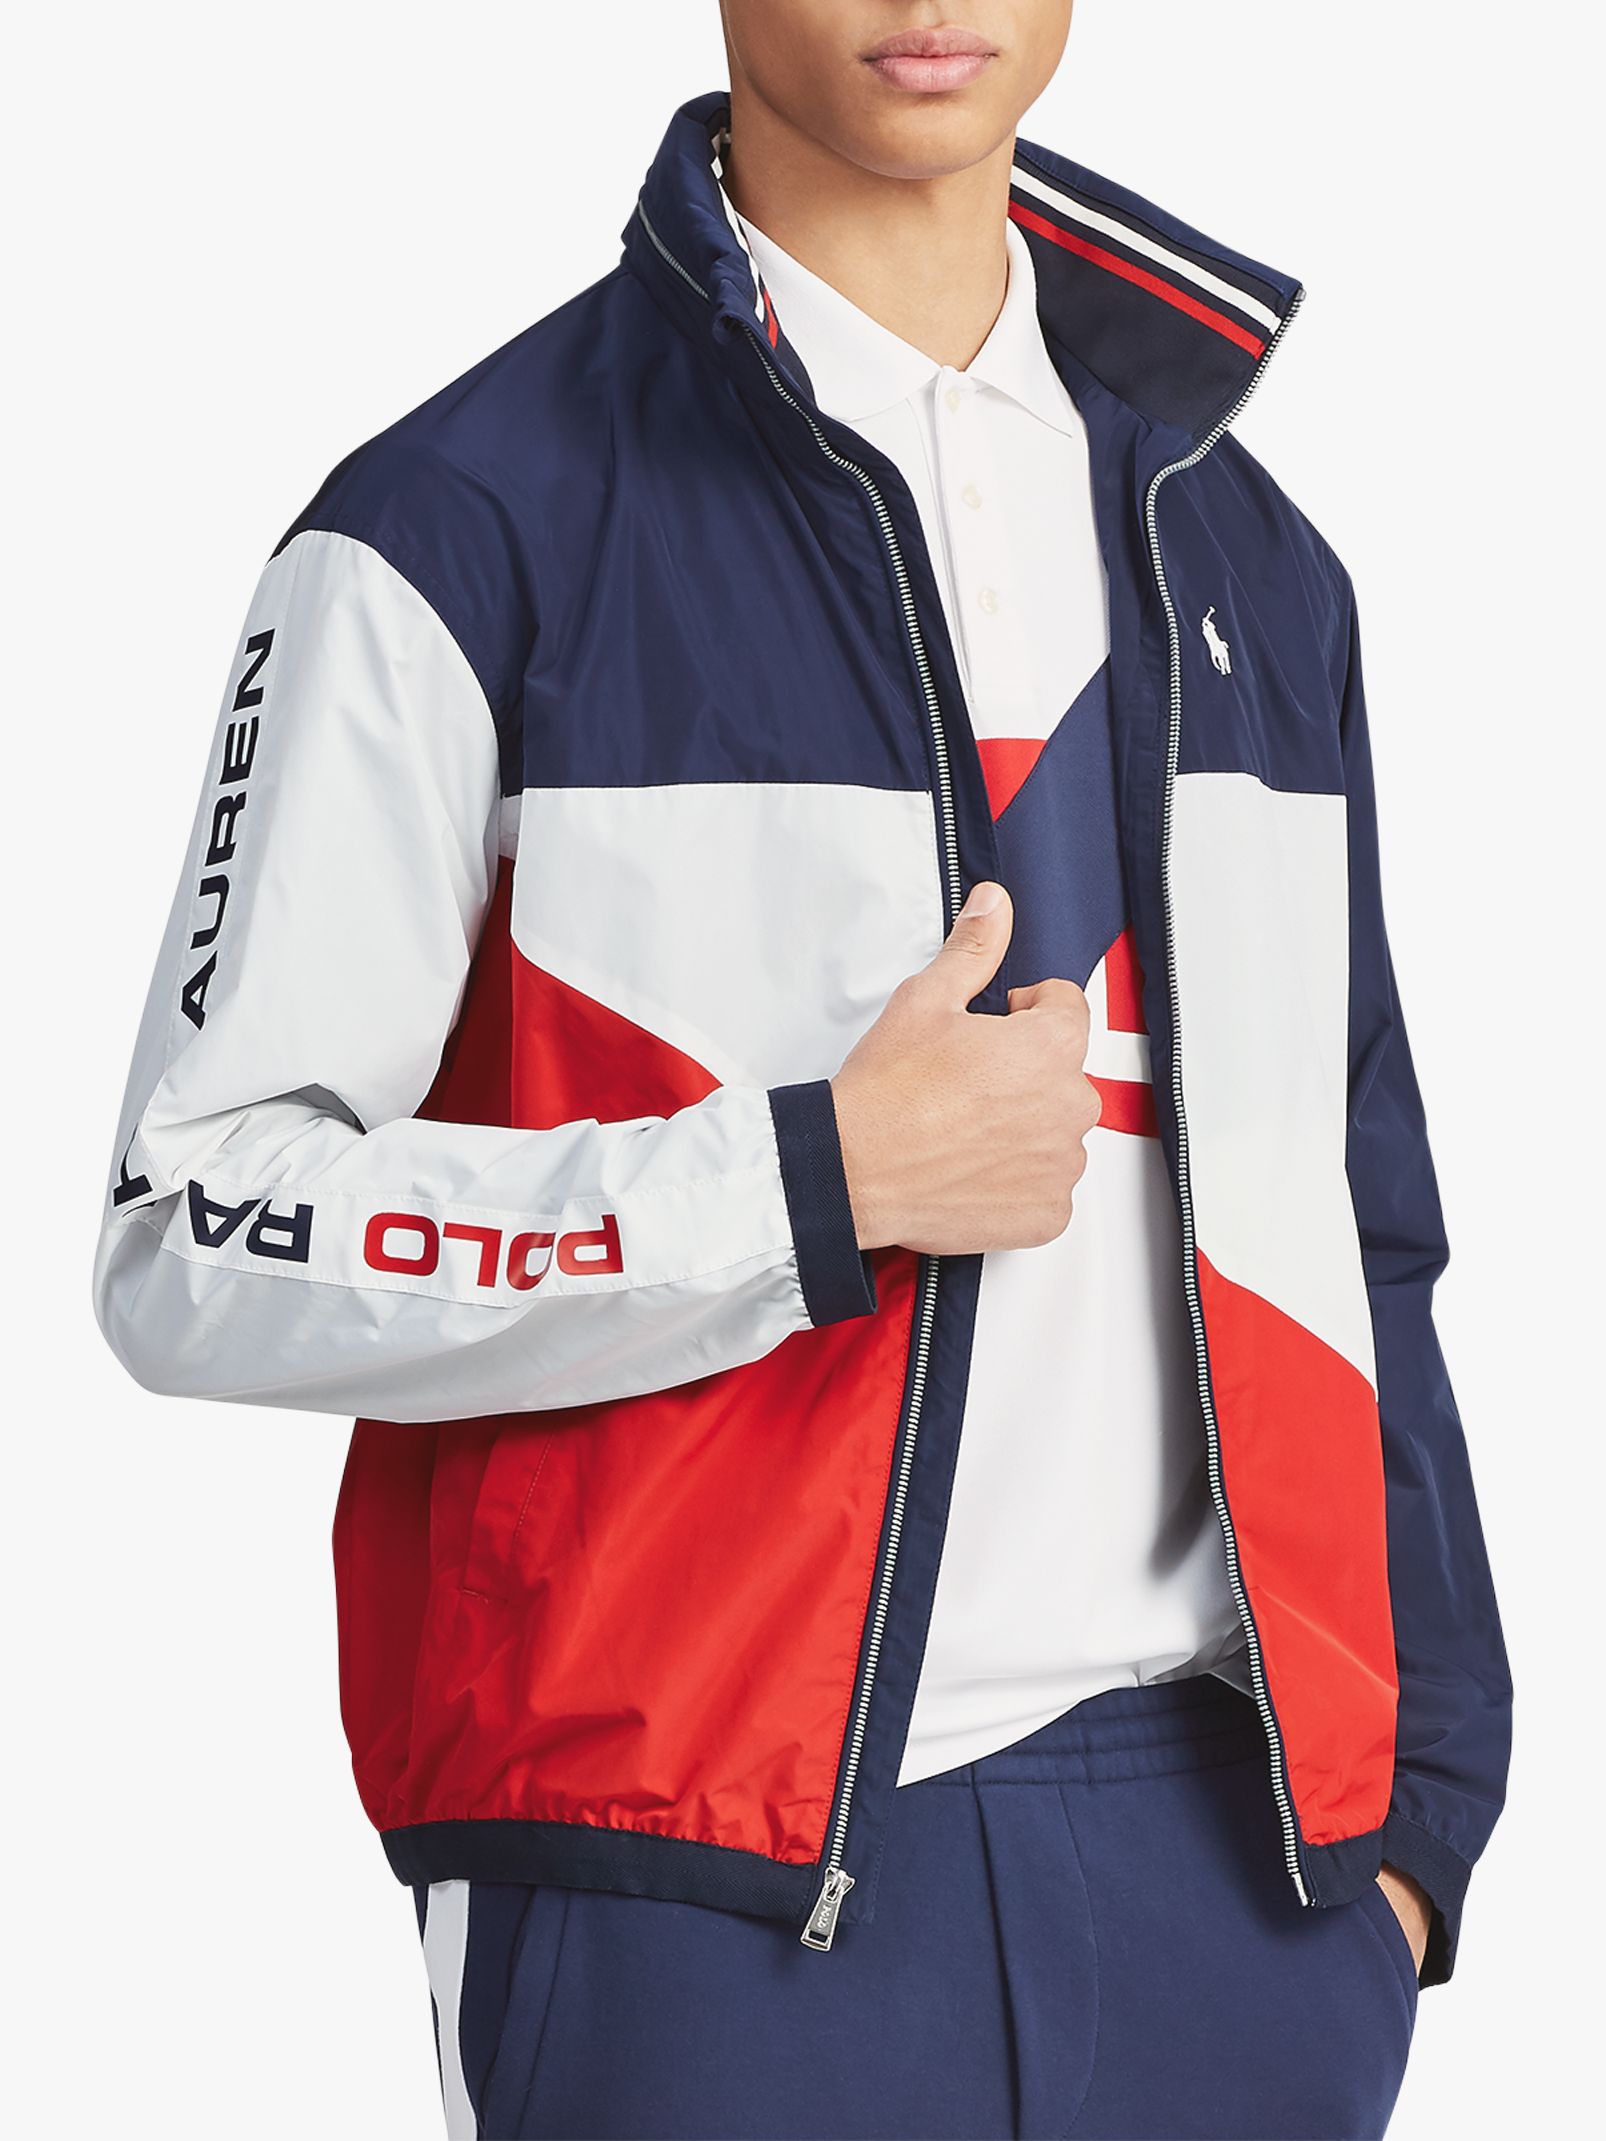 Polo Ralph Lauren Blue And Red Chariots Jacket Polo Ralph, 60% OFF